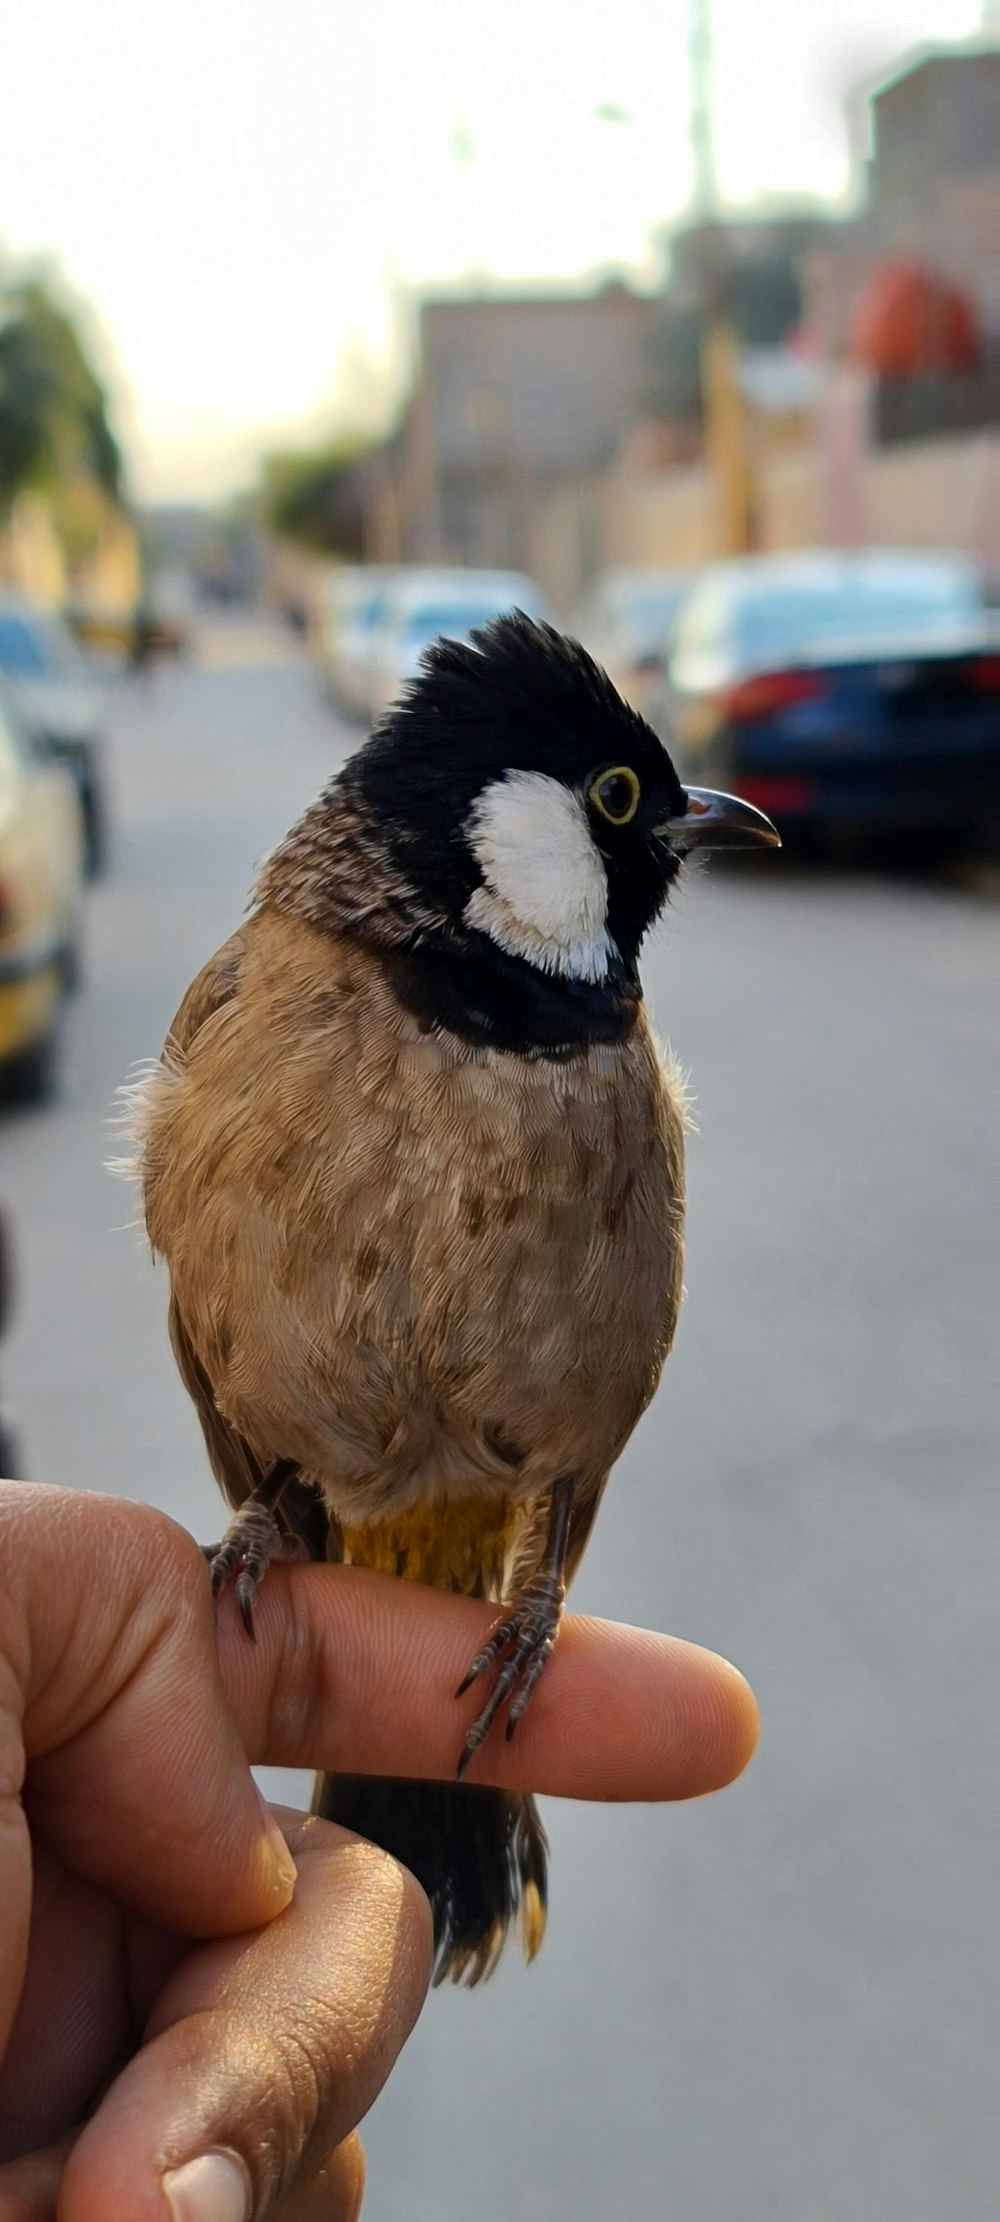 brown and black bird on persons hand